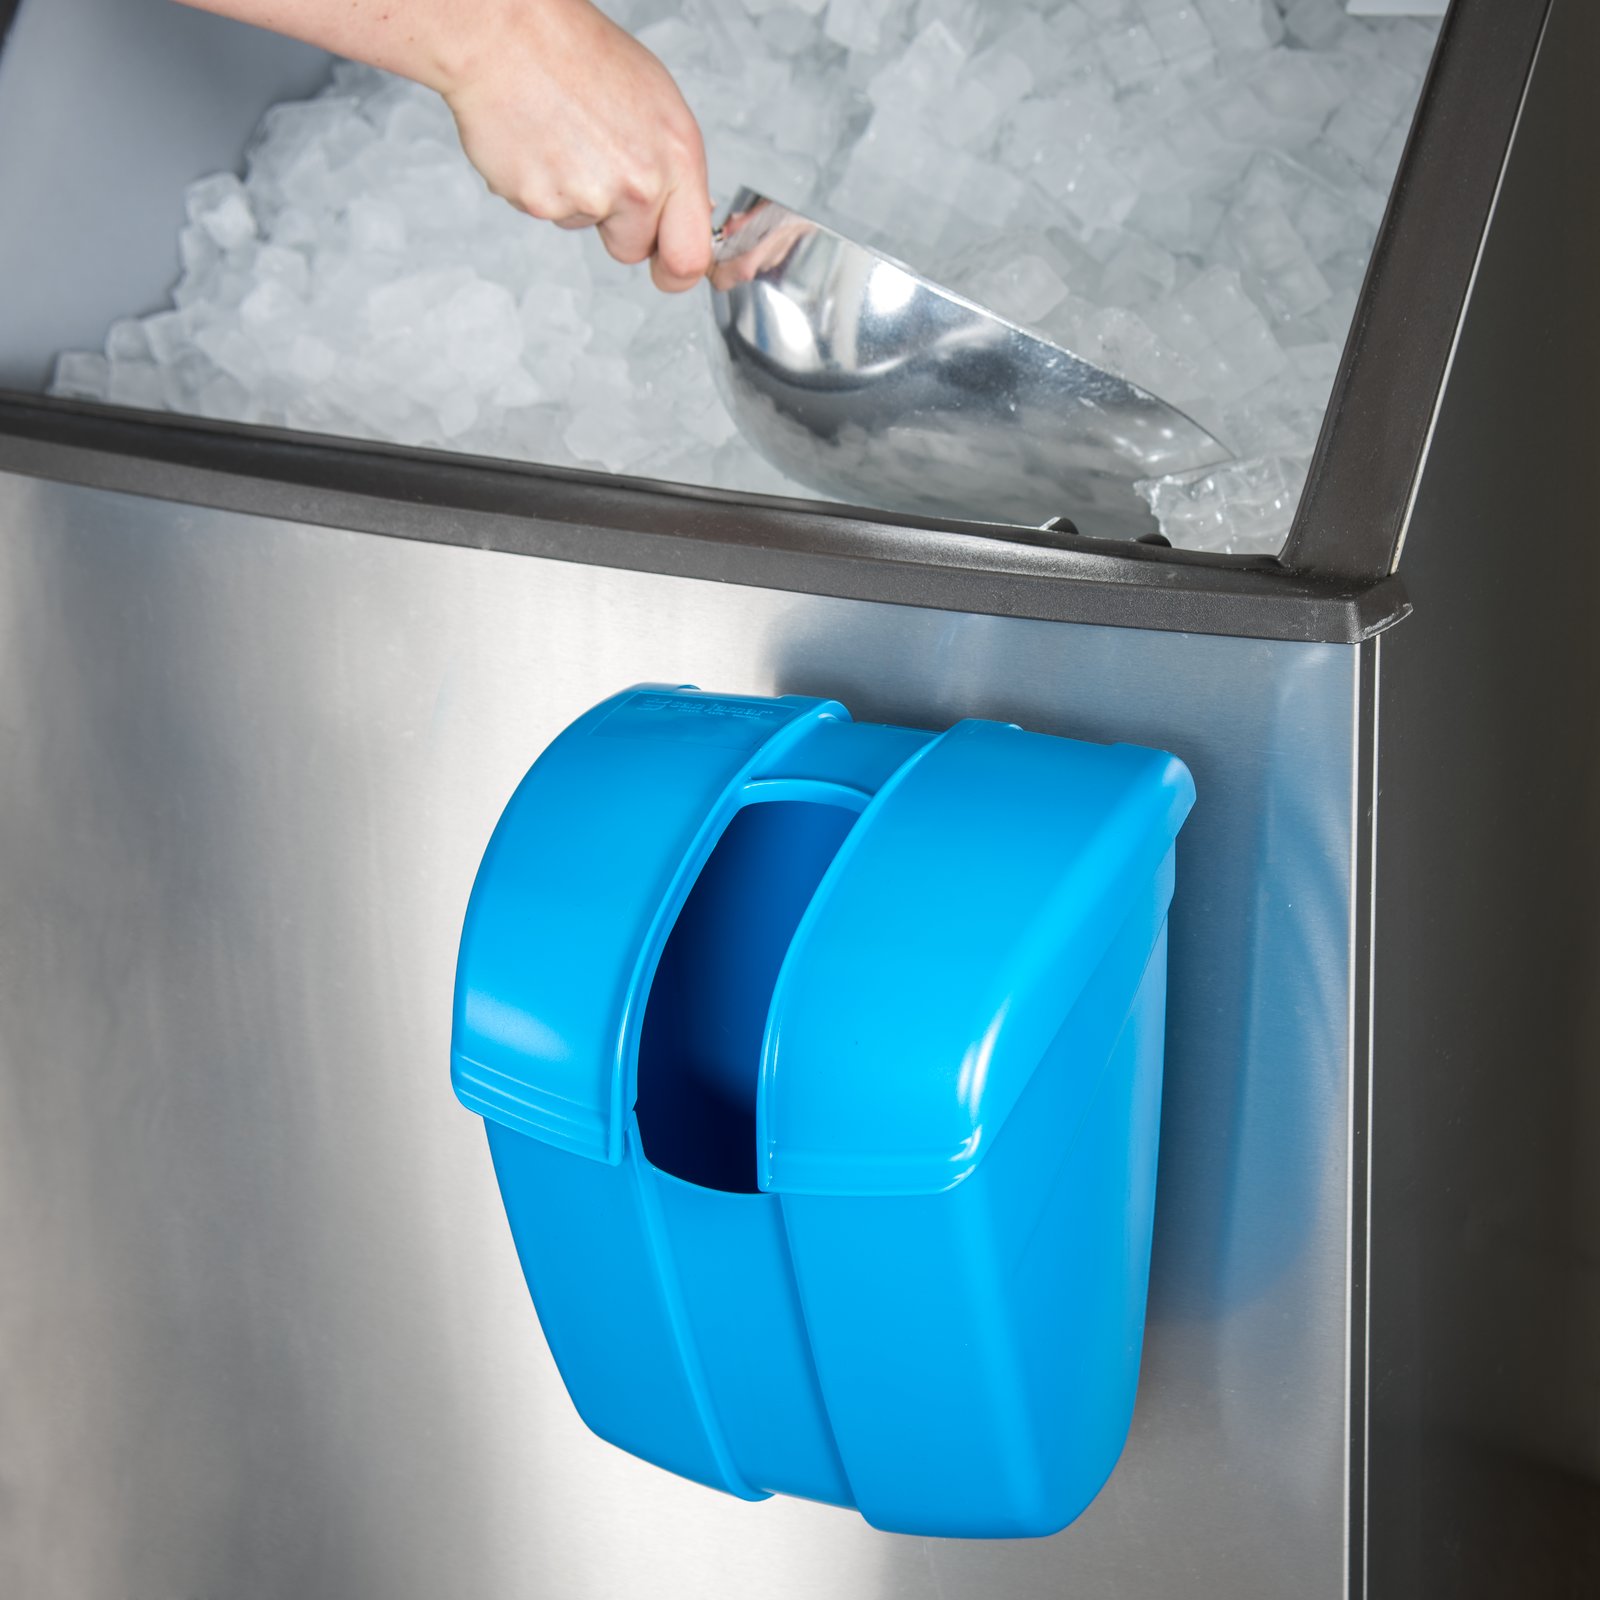 Saf-T-Ice® Scoop Caddy